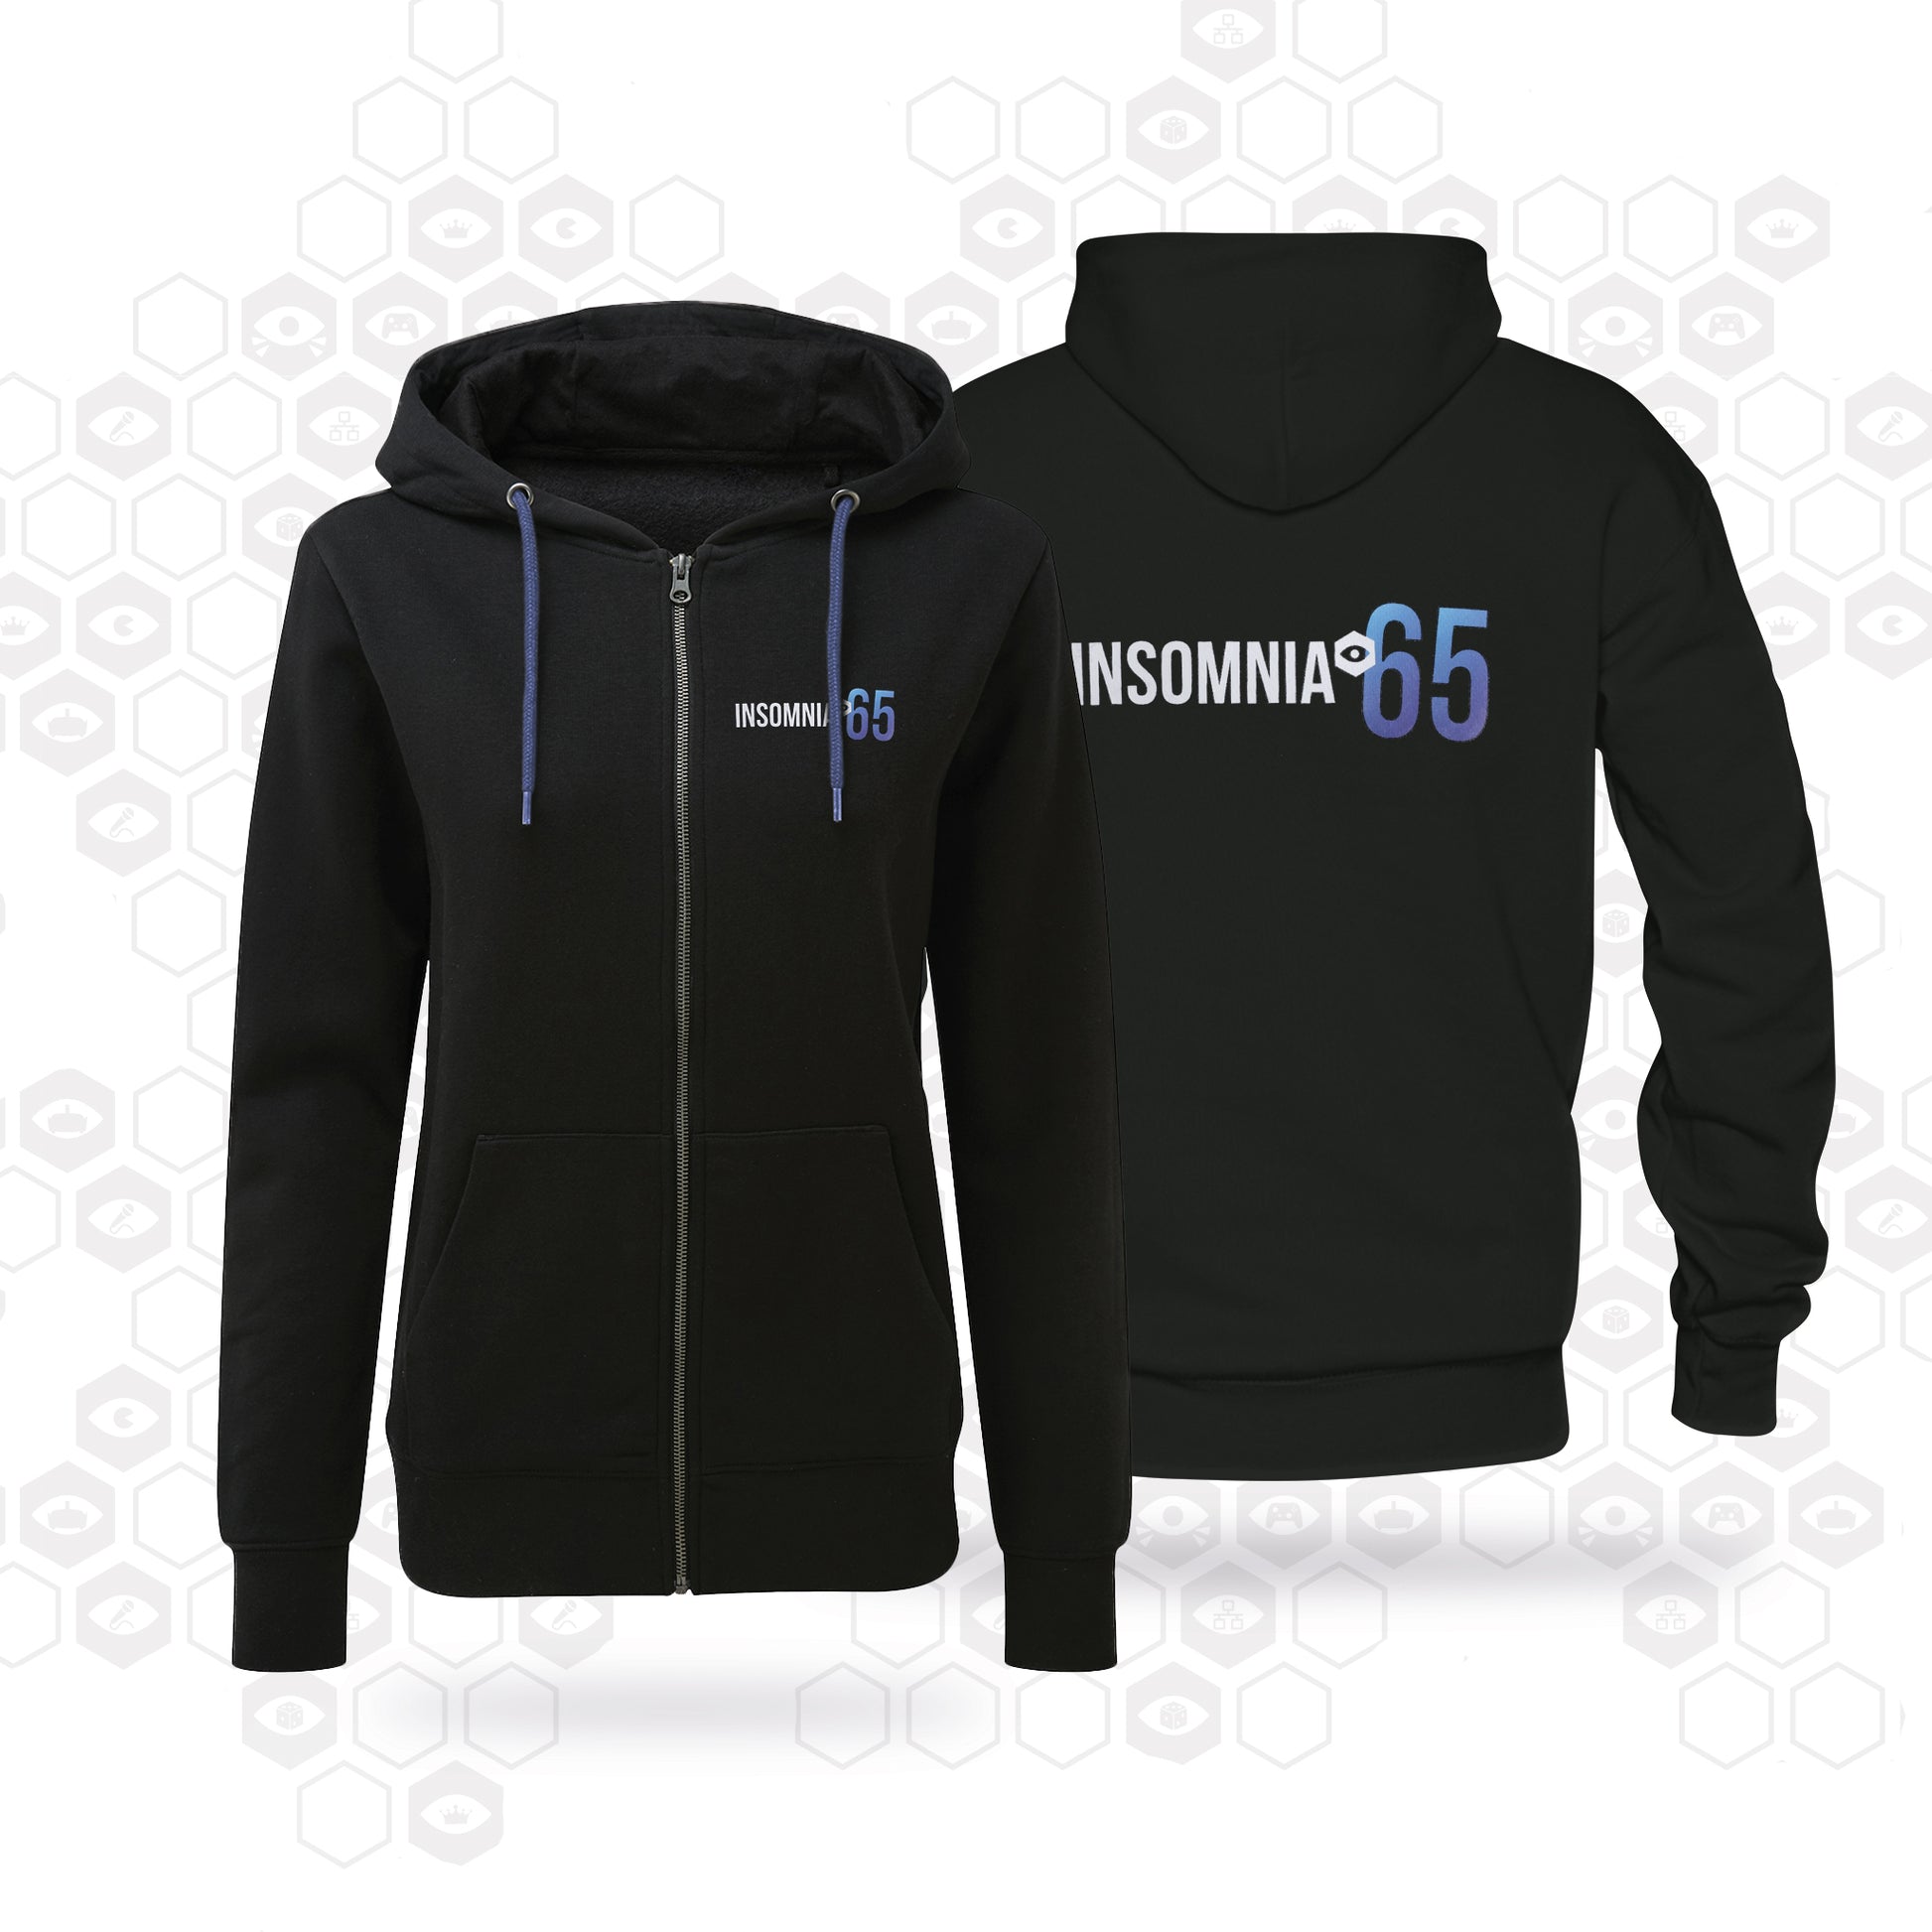 Black full zip hoodie printed with insomnia 65 left chest print and back print